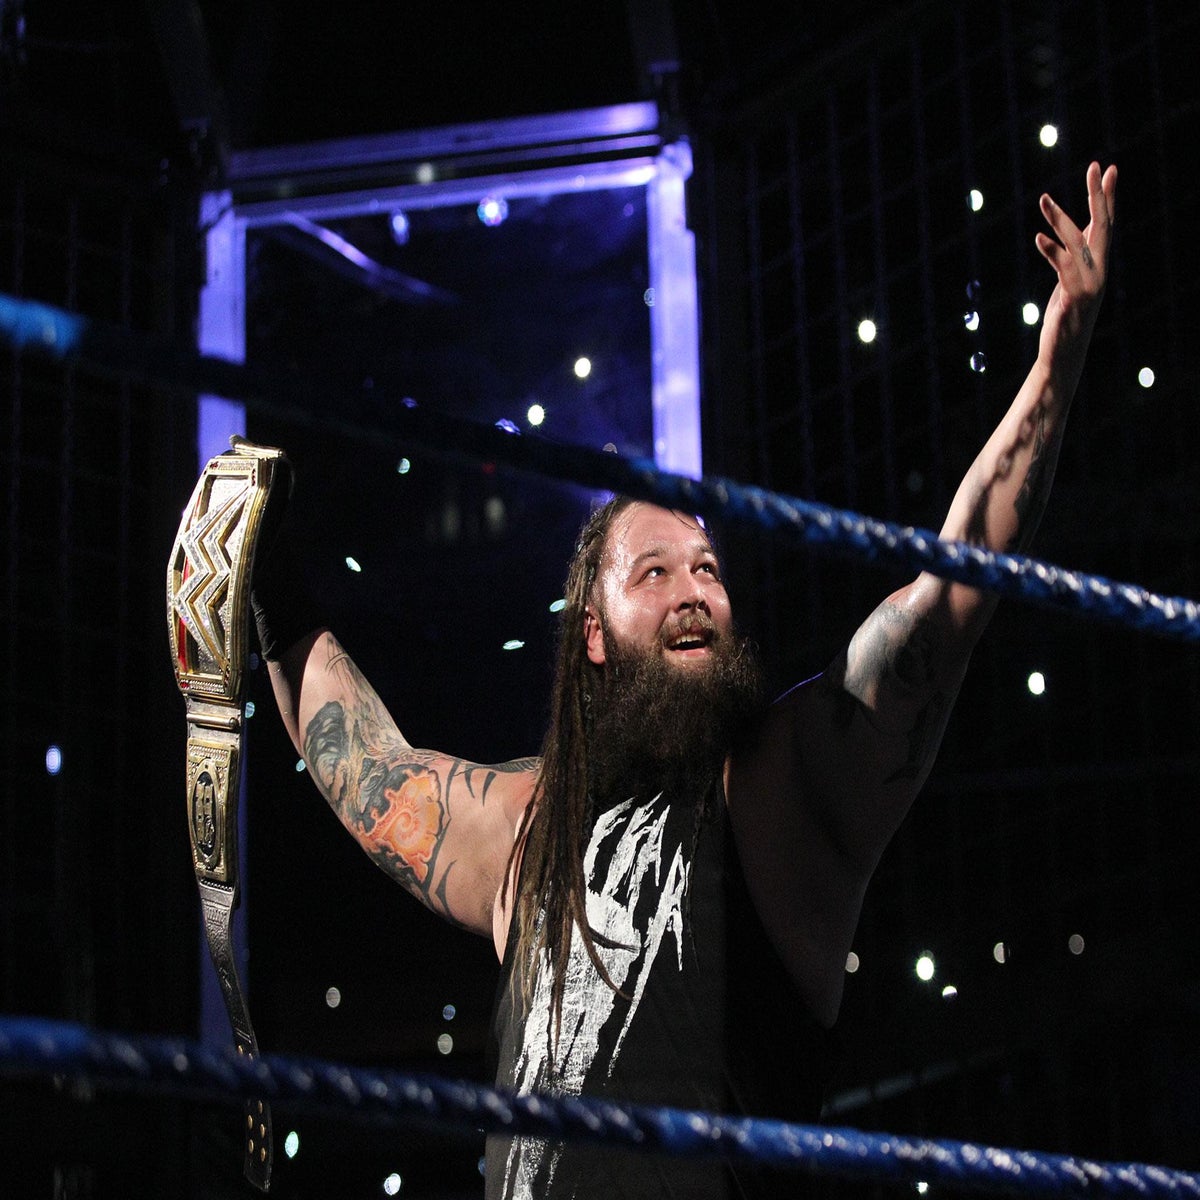 Bray Wyatt cause of death revealed after WWE superstar dies unexpectedly  at 36 - Mirror Online